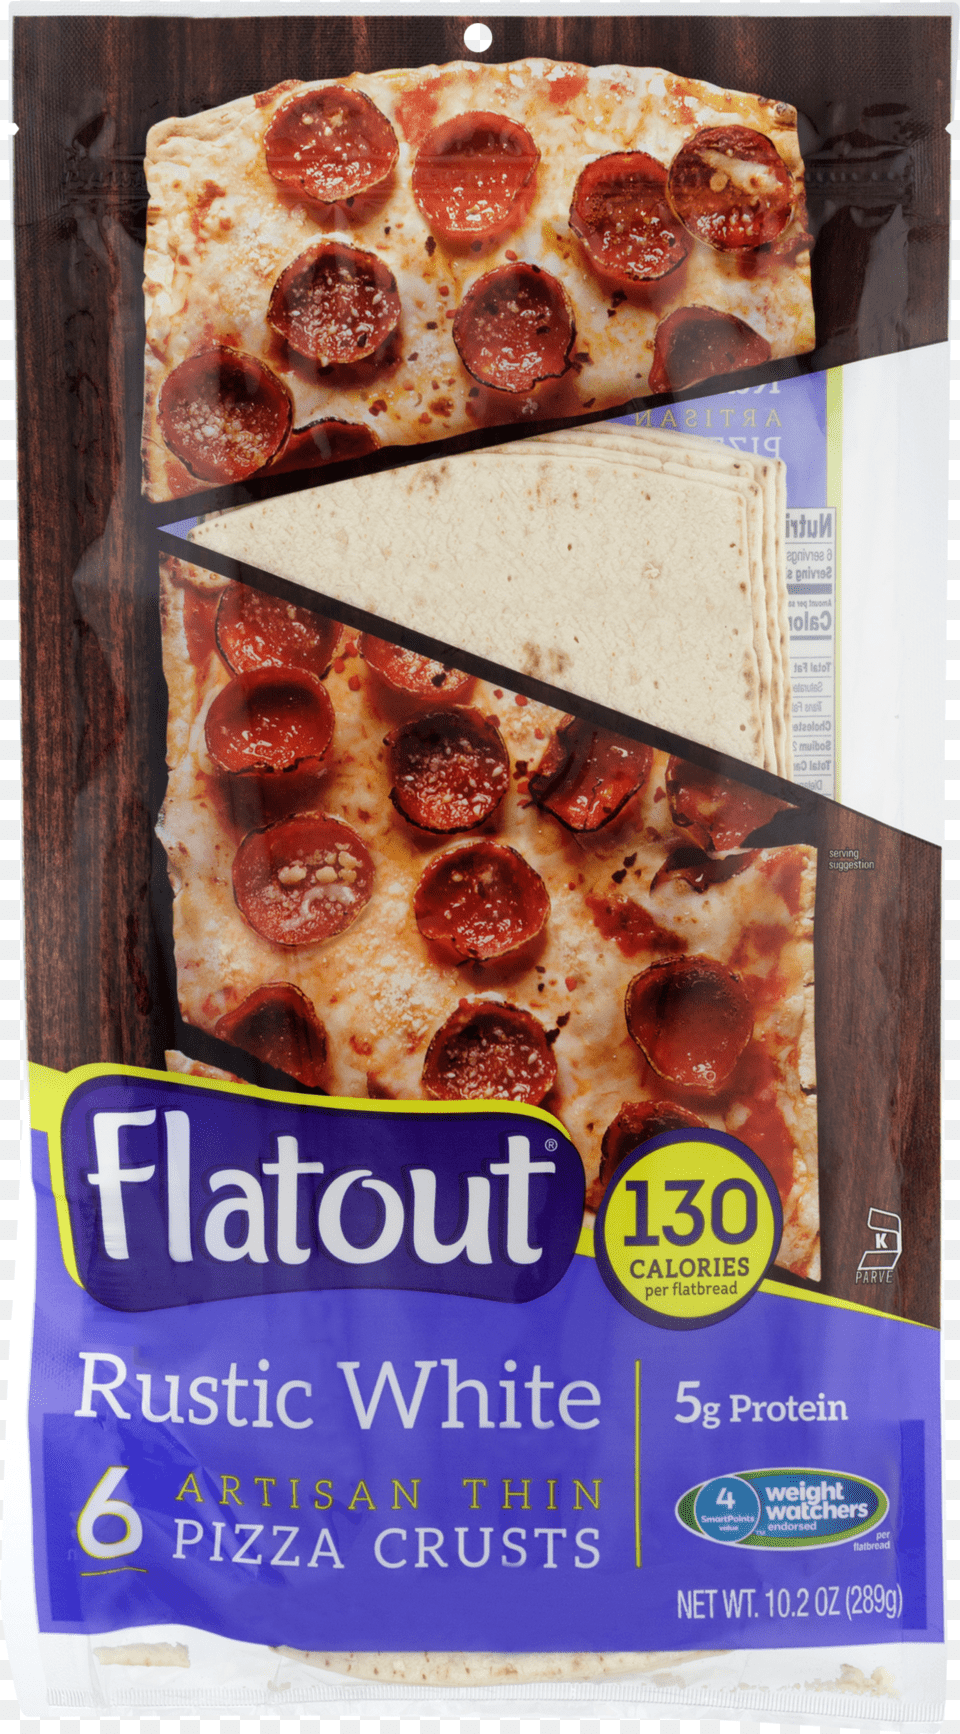 Flatout Rustic White Artisan Thin Pizza Crust, Advertisement, Poster, Food Free Png